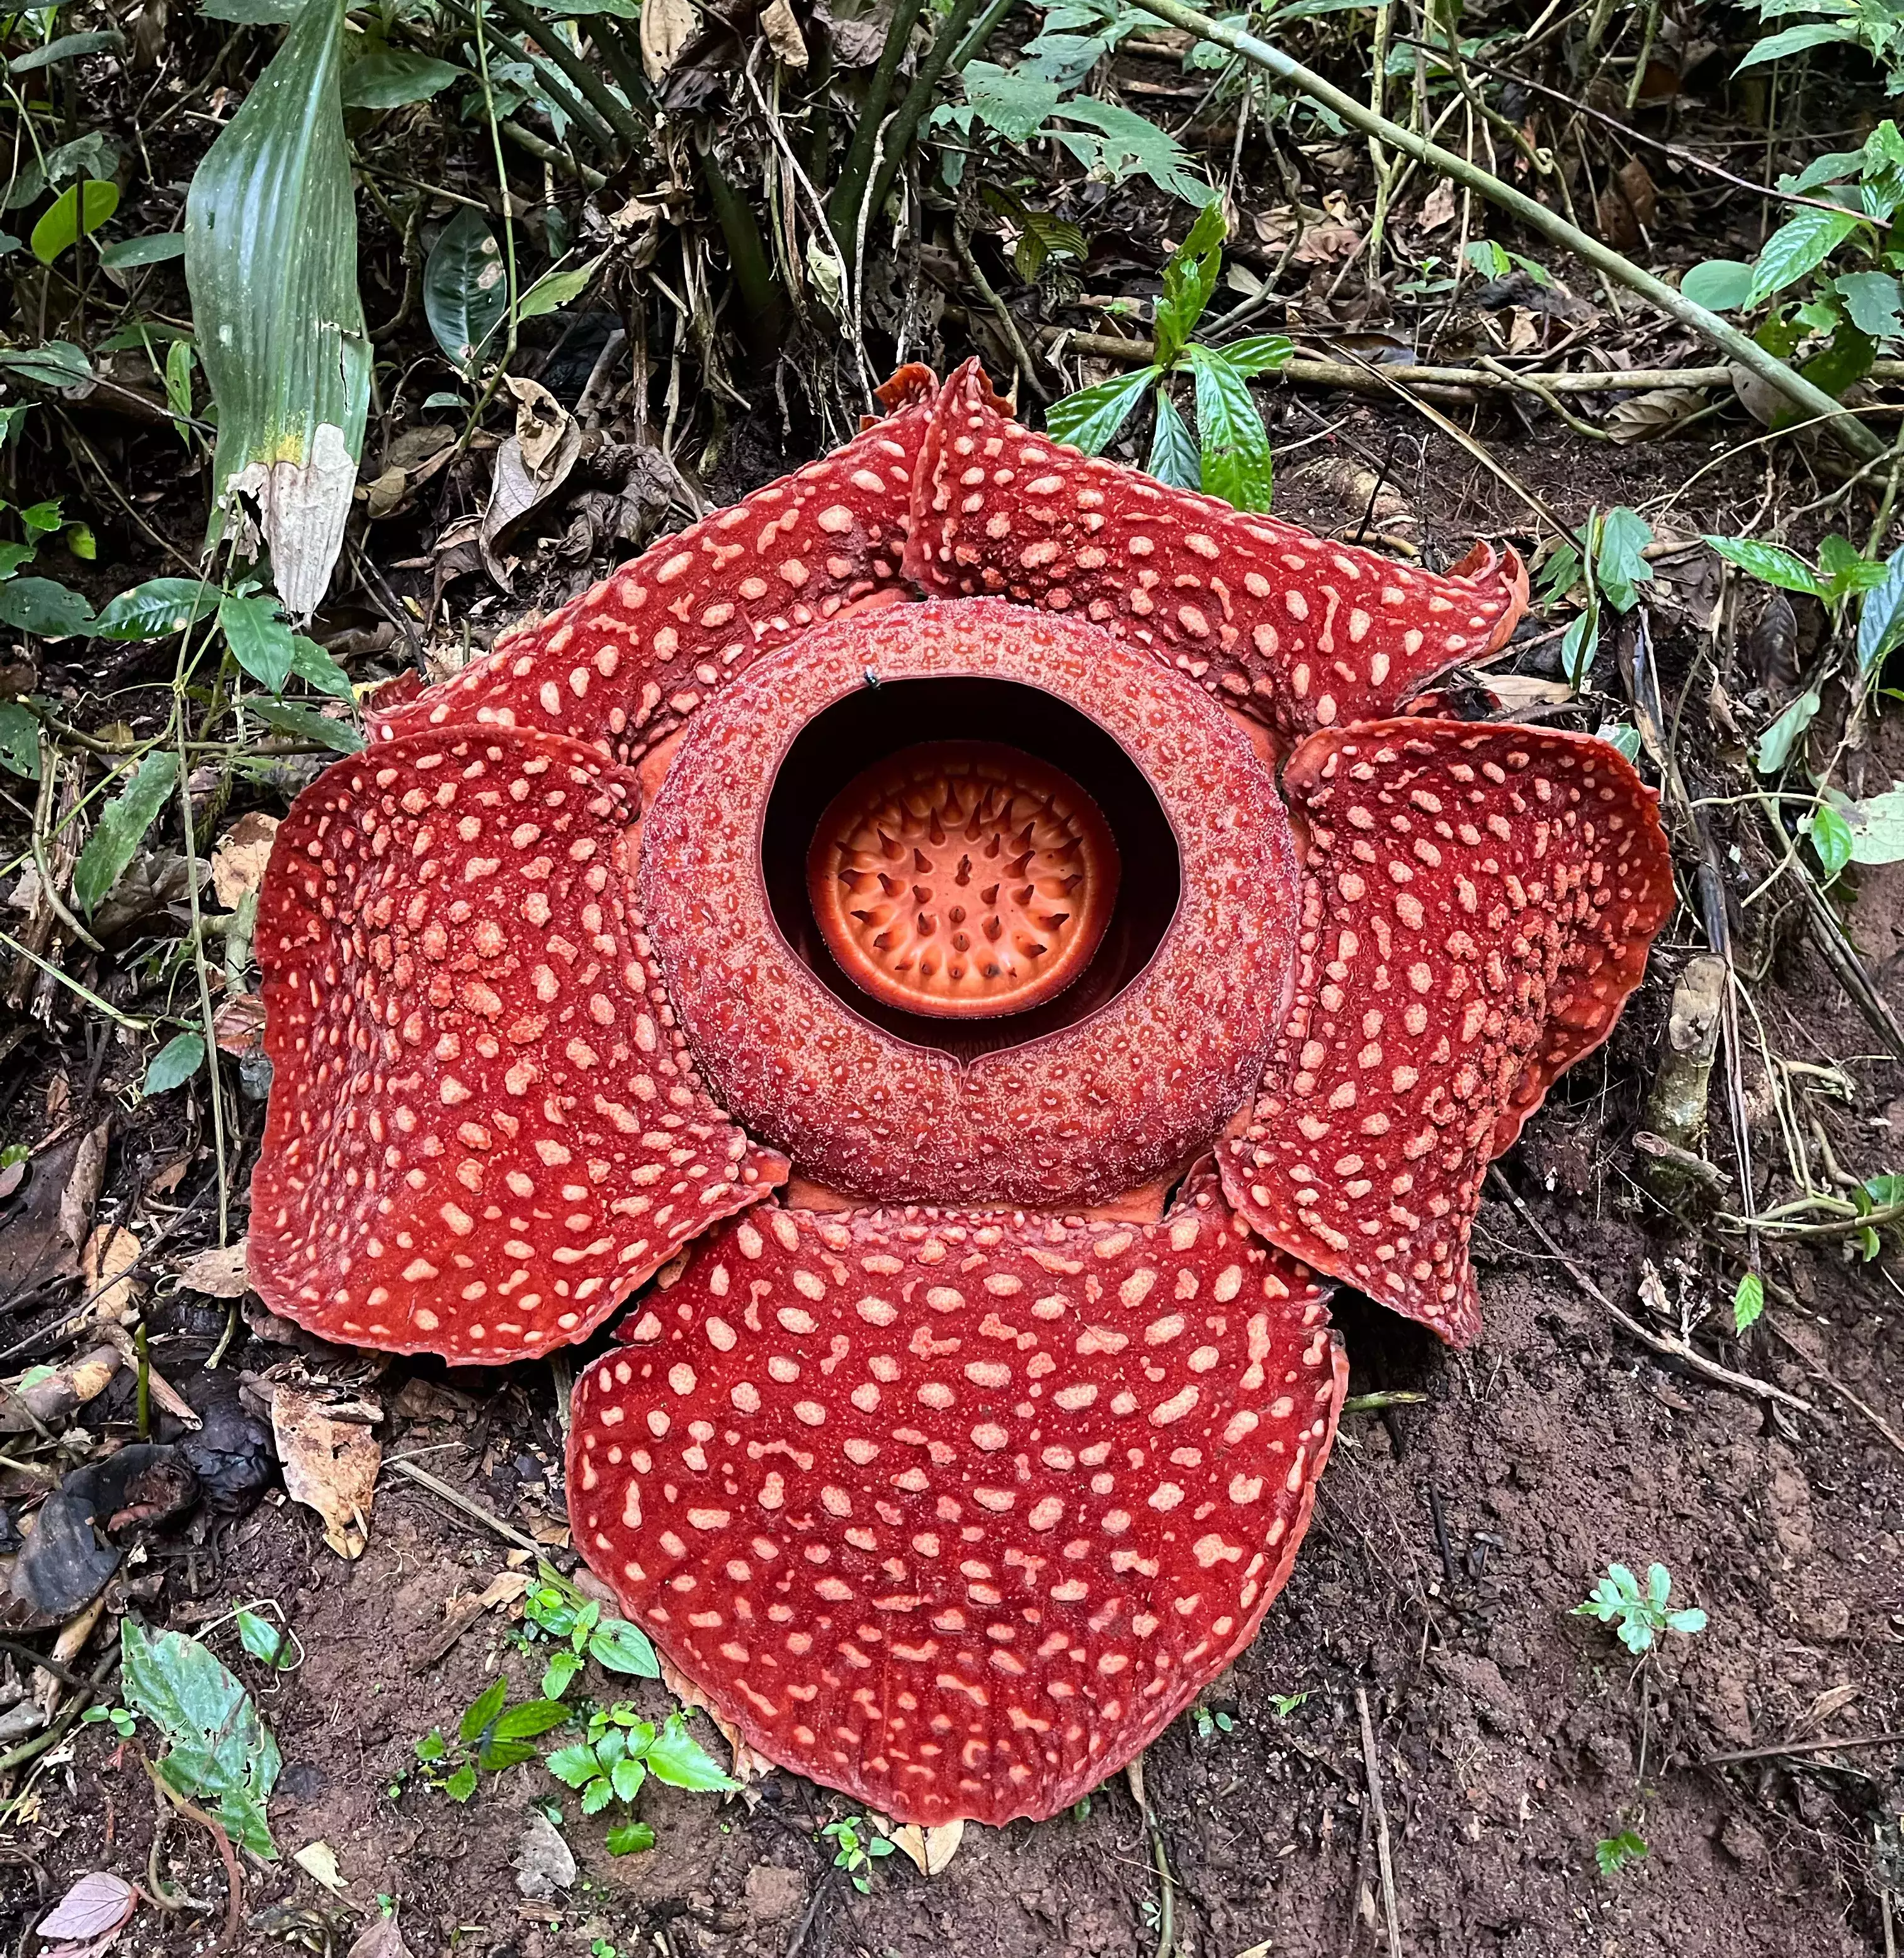 Man finds the largest flower in the world Rafflesia Arnoldii